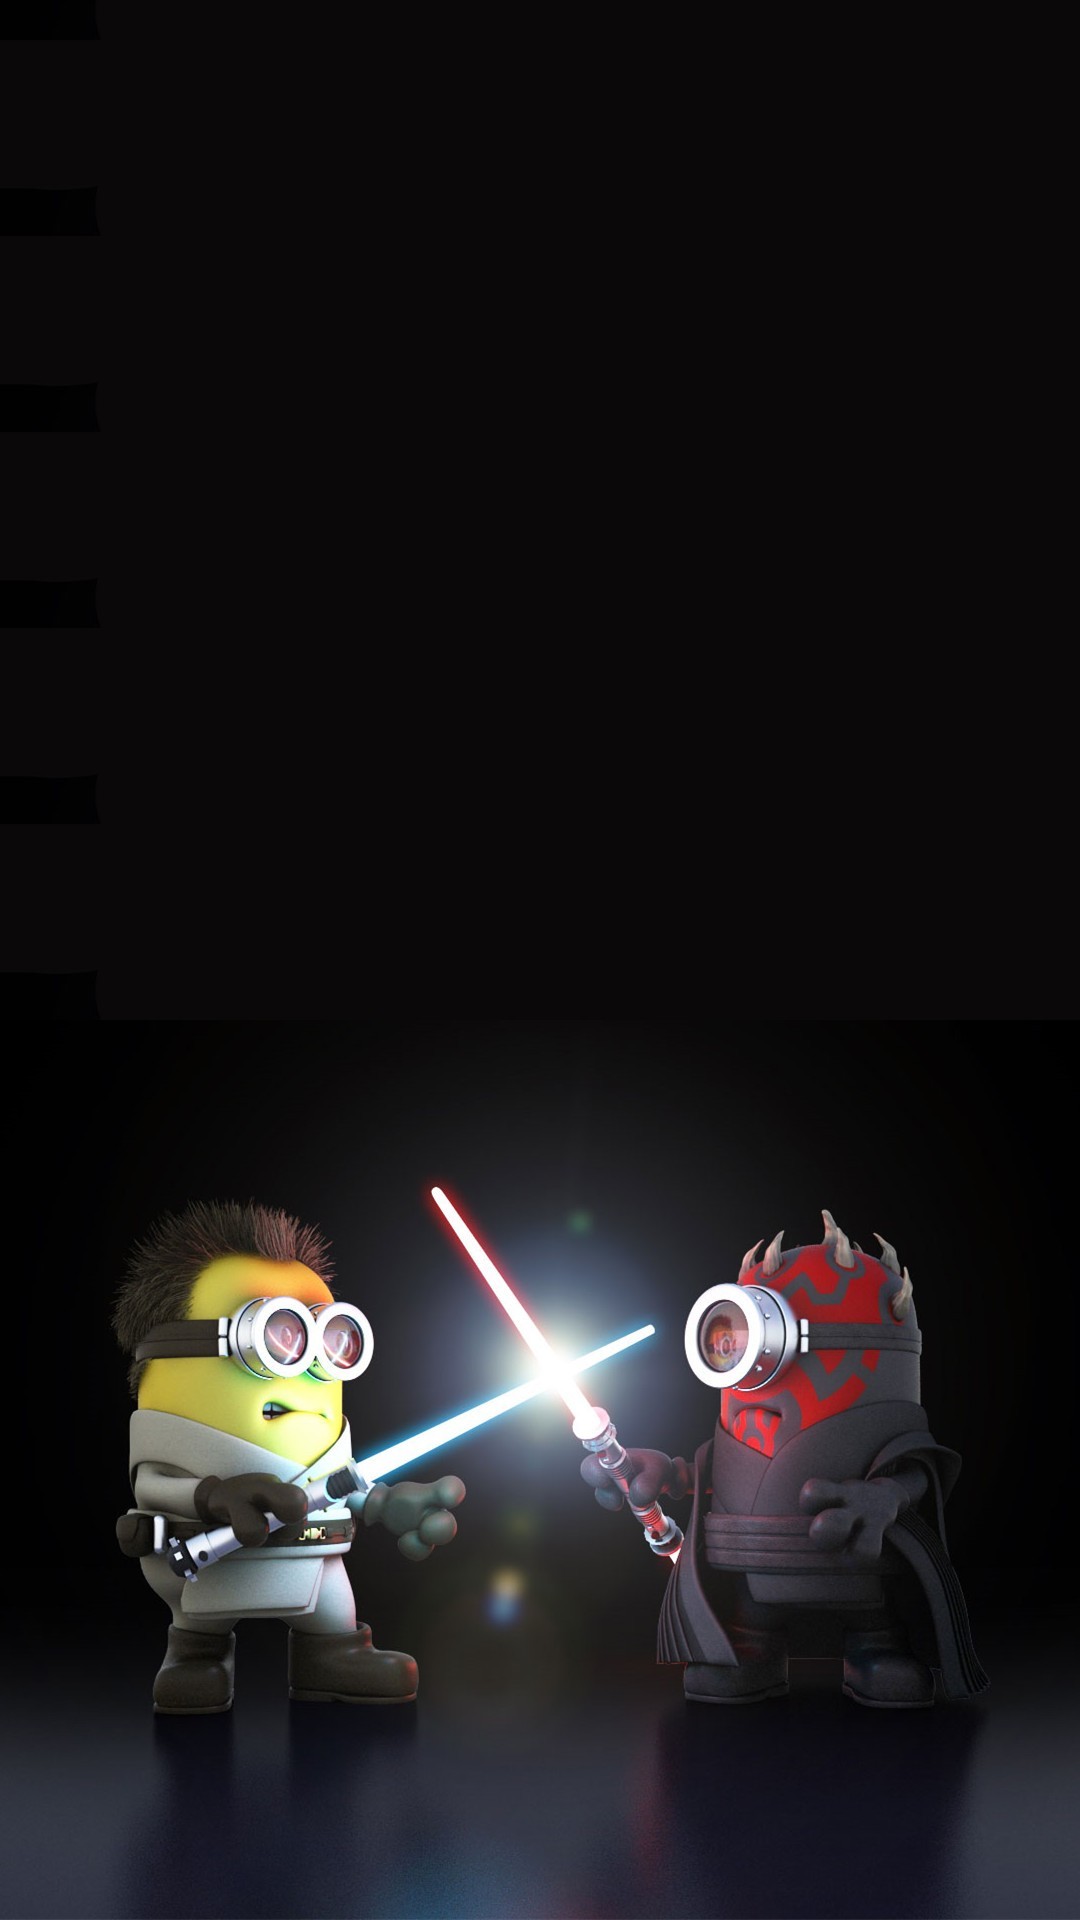 1080x1920 Vamers - Artistry - Fandom - Minion Wars Feel the Force - Star Wars and  Despicable Me Mash-Up - Minion Obi Wan versus Darth Maul